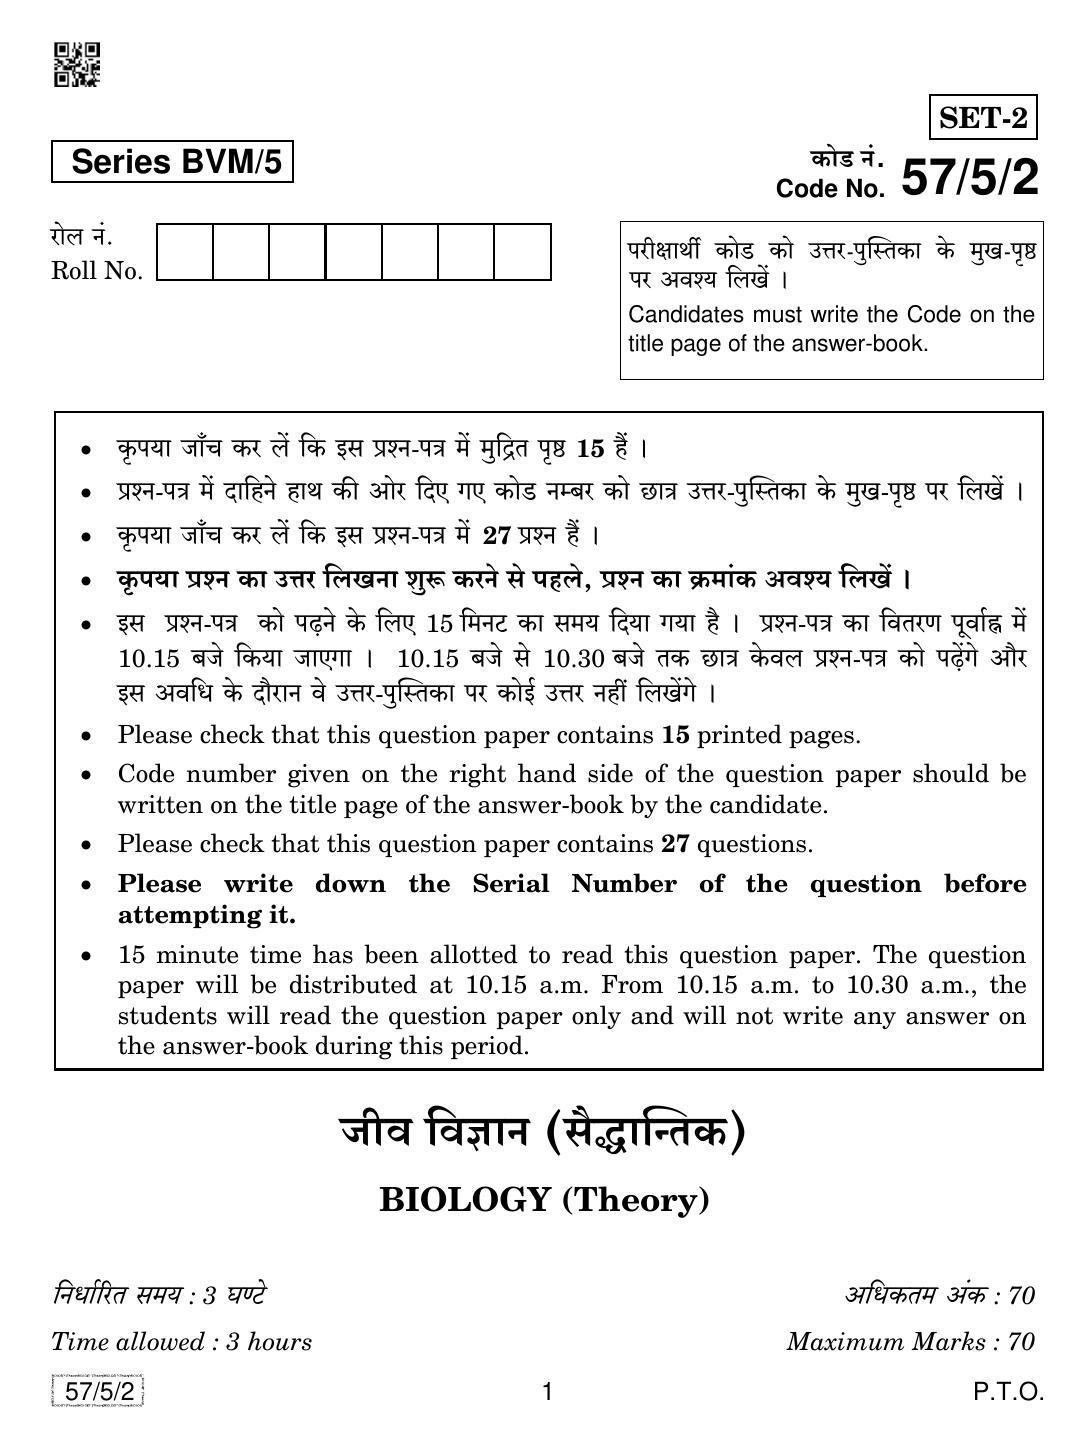 CBSE Class 12 57-5-2 Biology 2019 Question Paper - Page 1